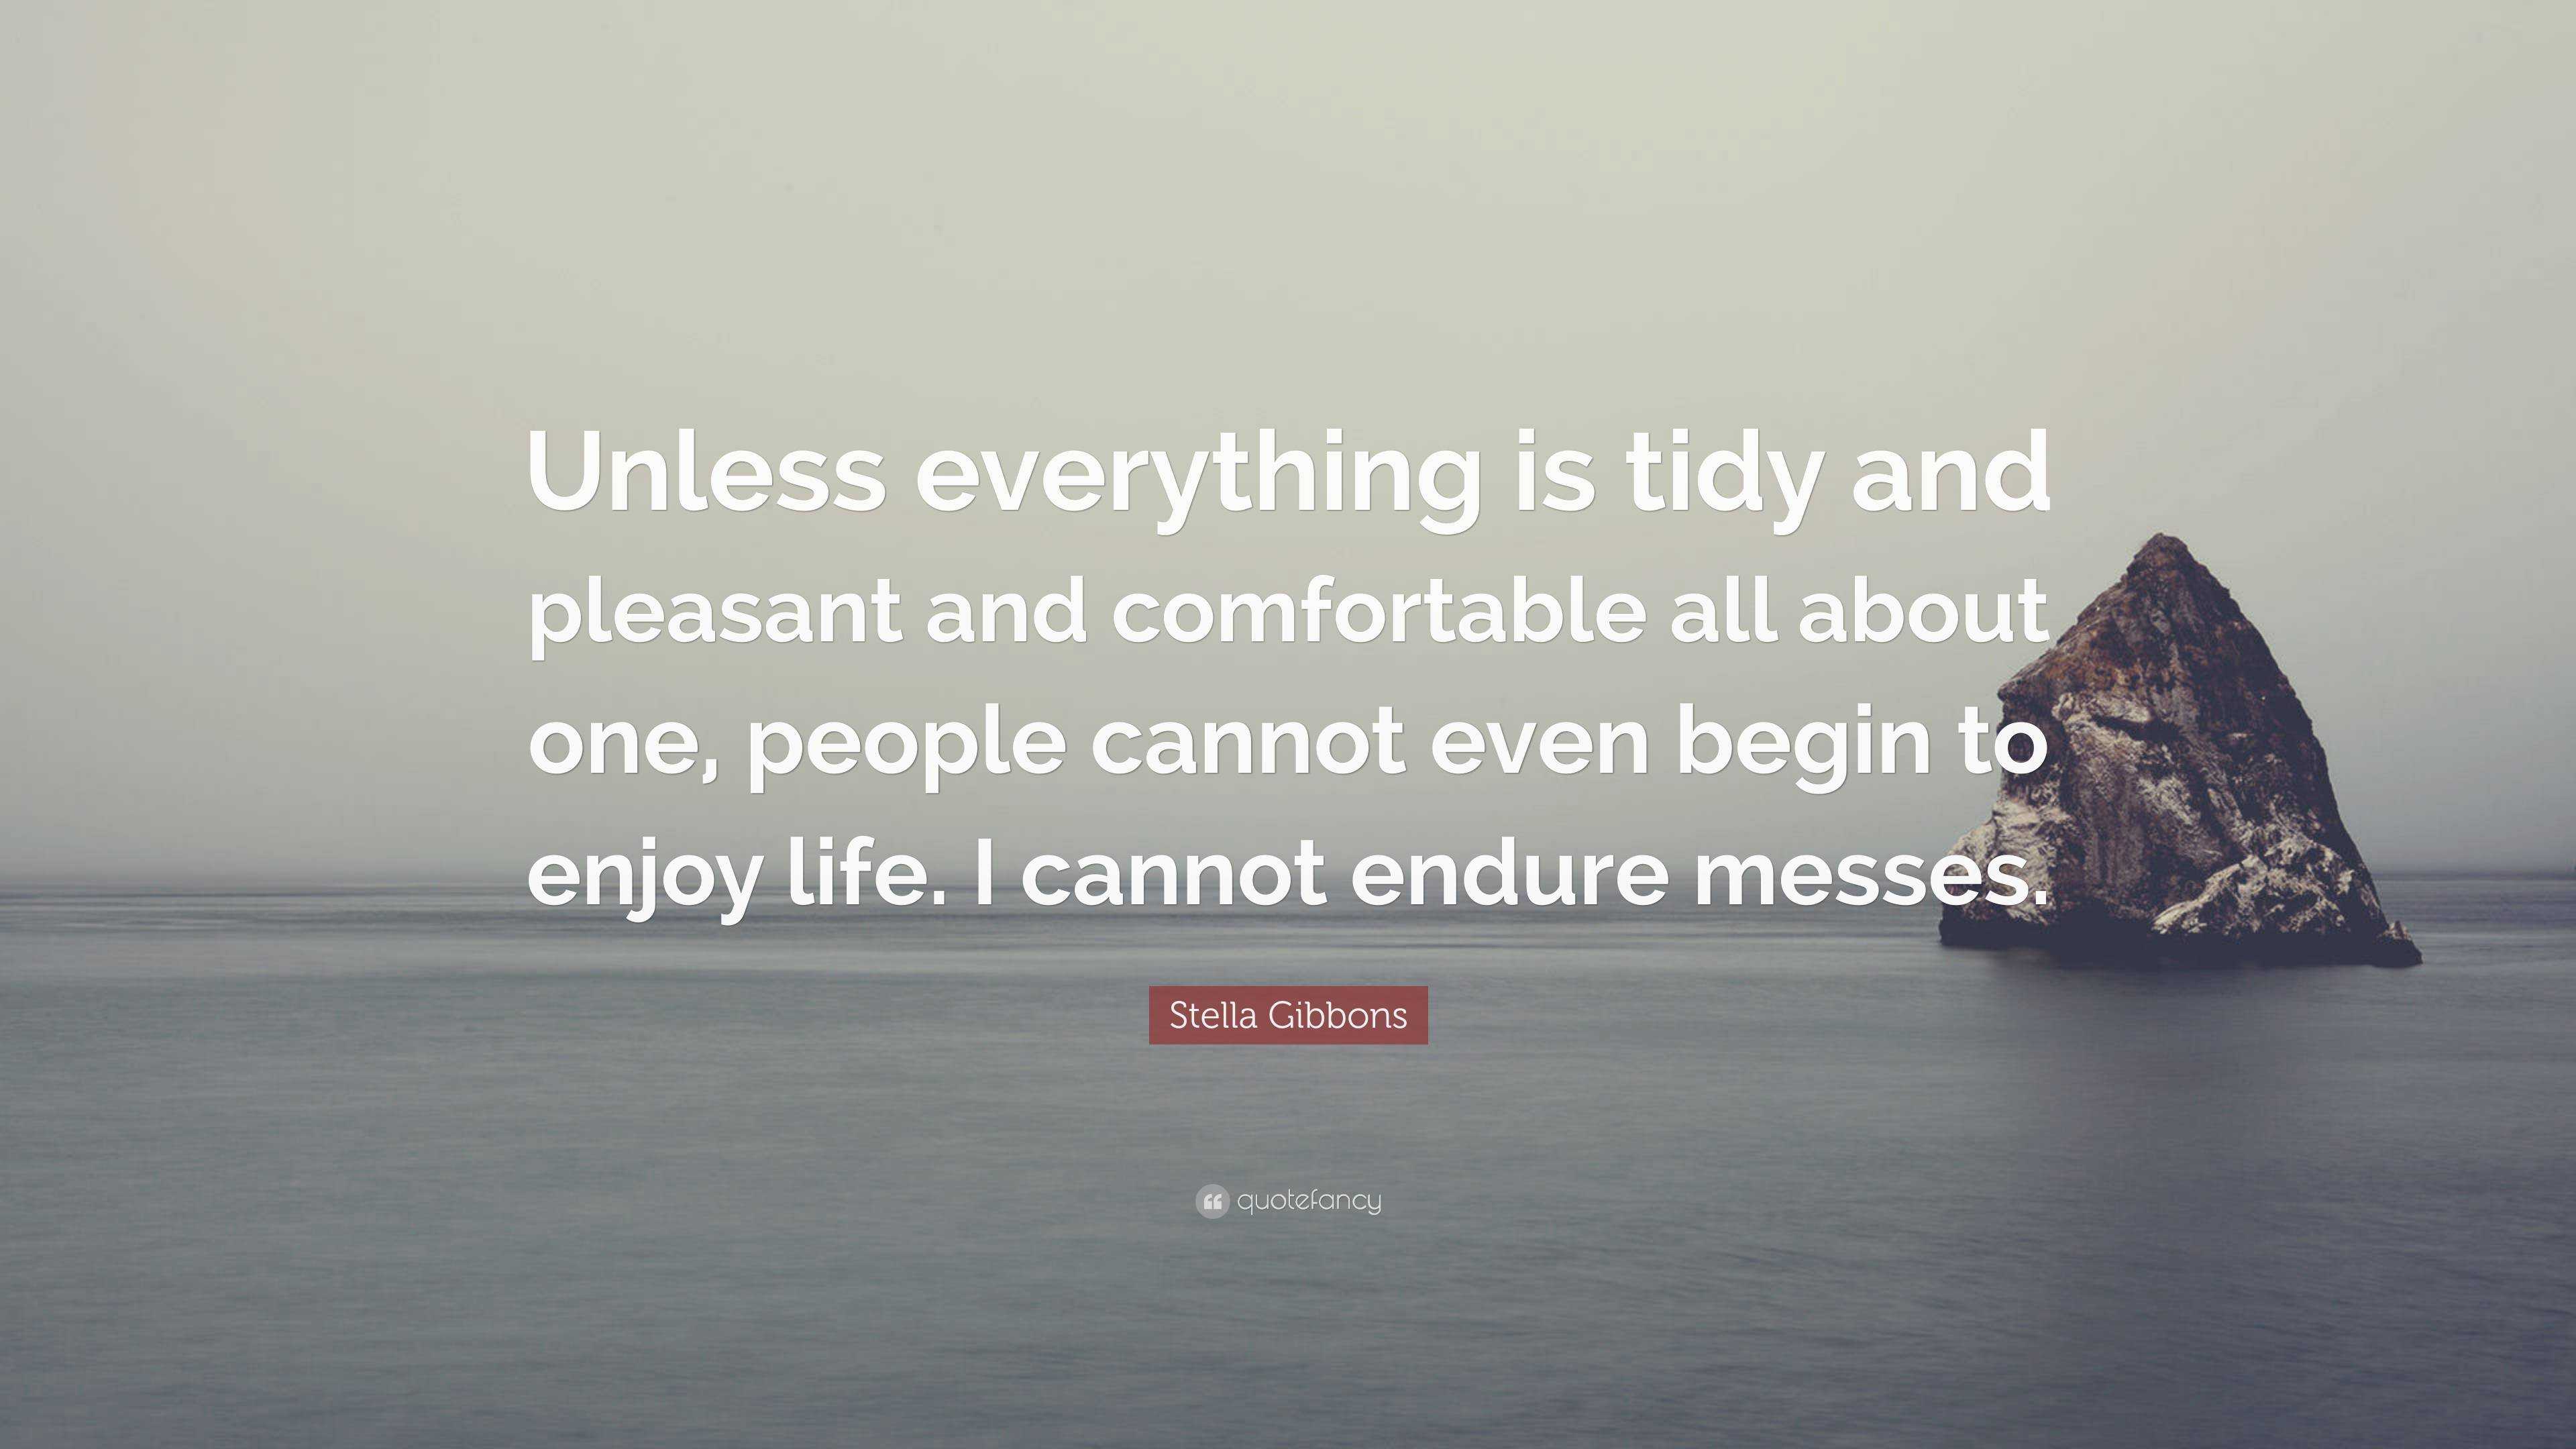 Stella Gibbons Quote: “Unless everything is tidy and pleasant and ...